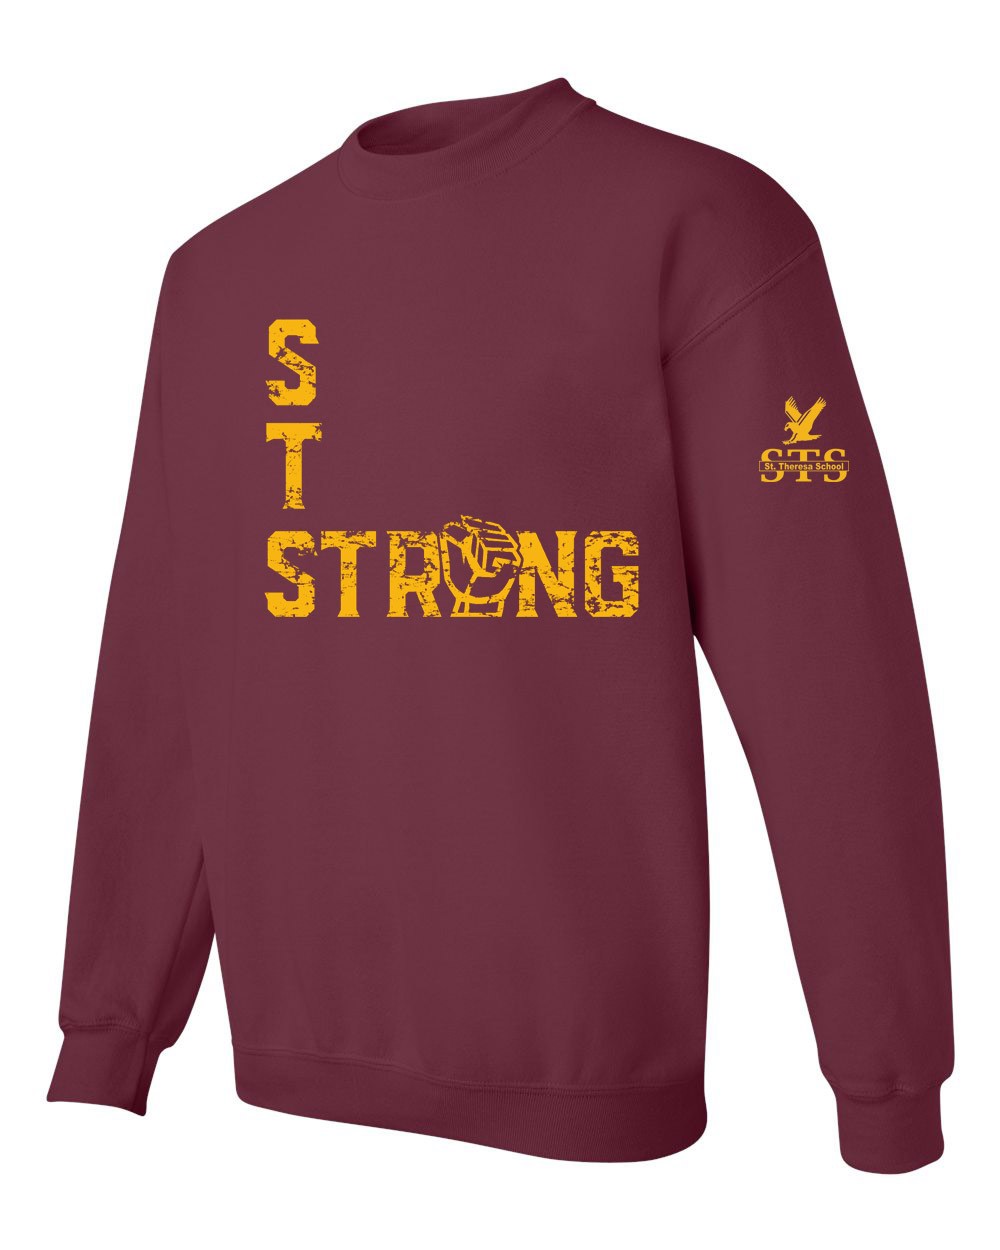 STS Strong L/S Fist Spirit T-Shirt w/ Gold Logo - Please Allow 2-3 Weeks for Delivery